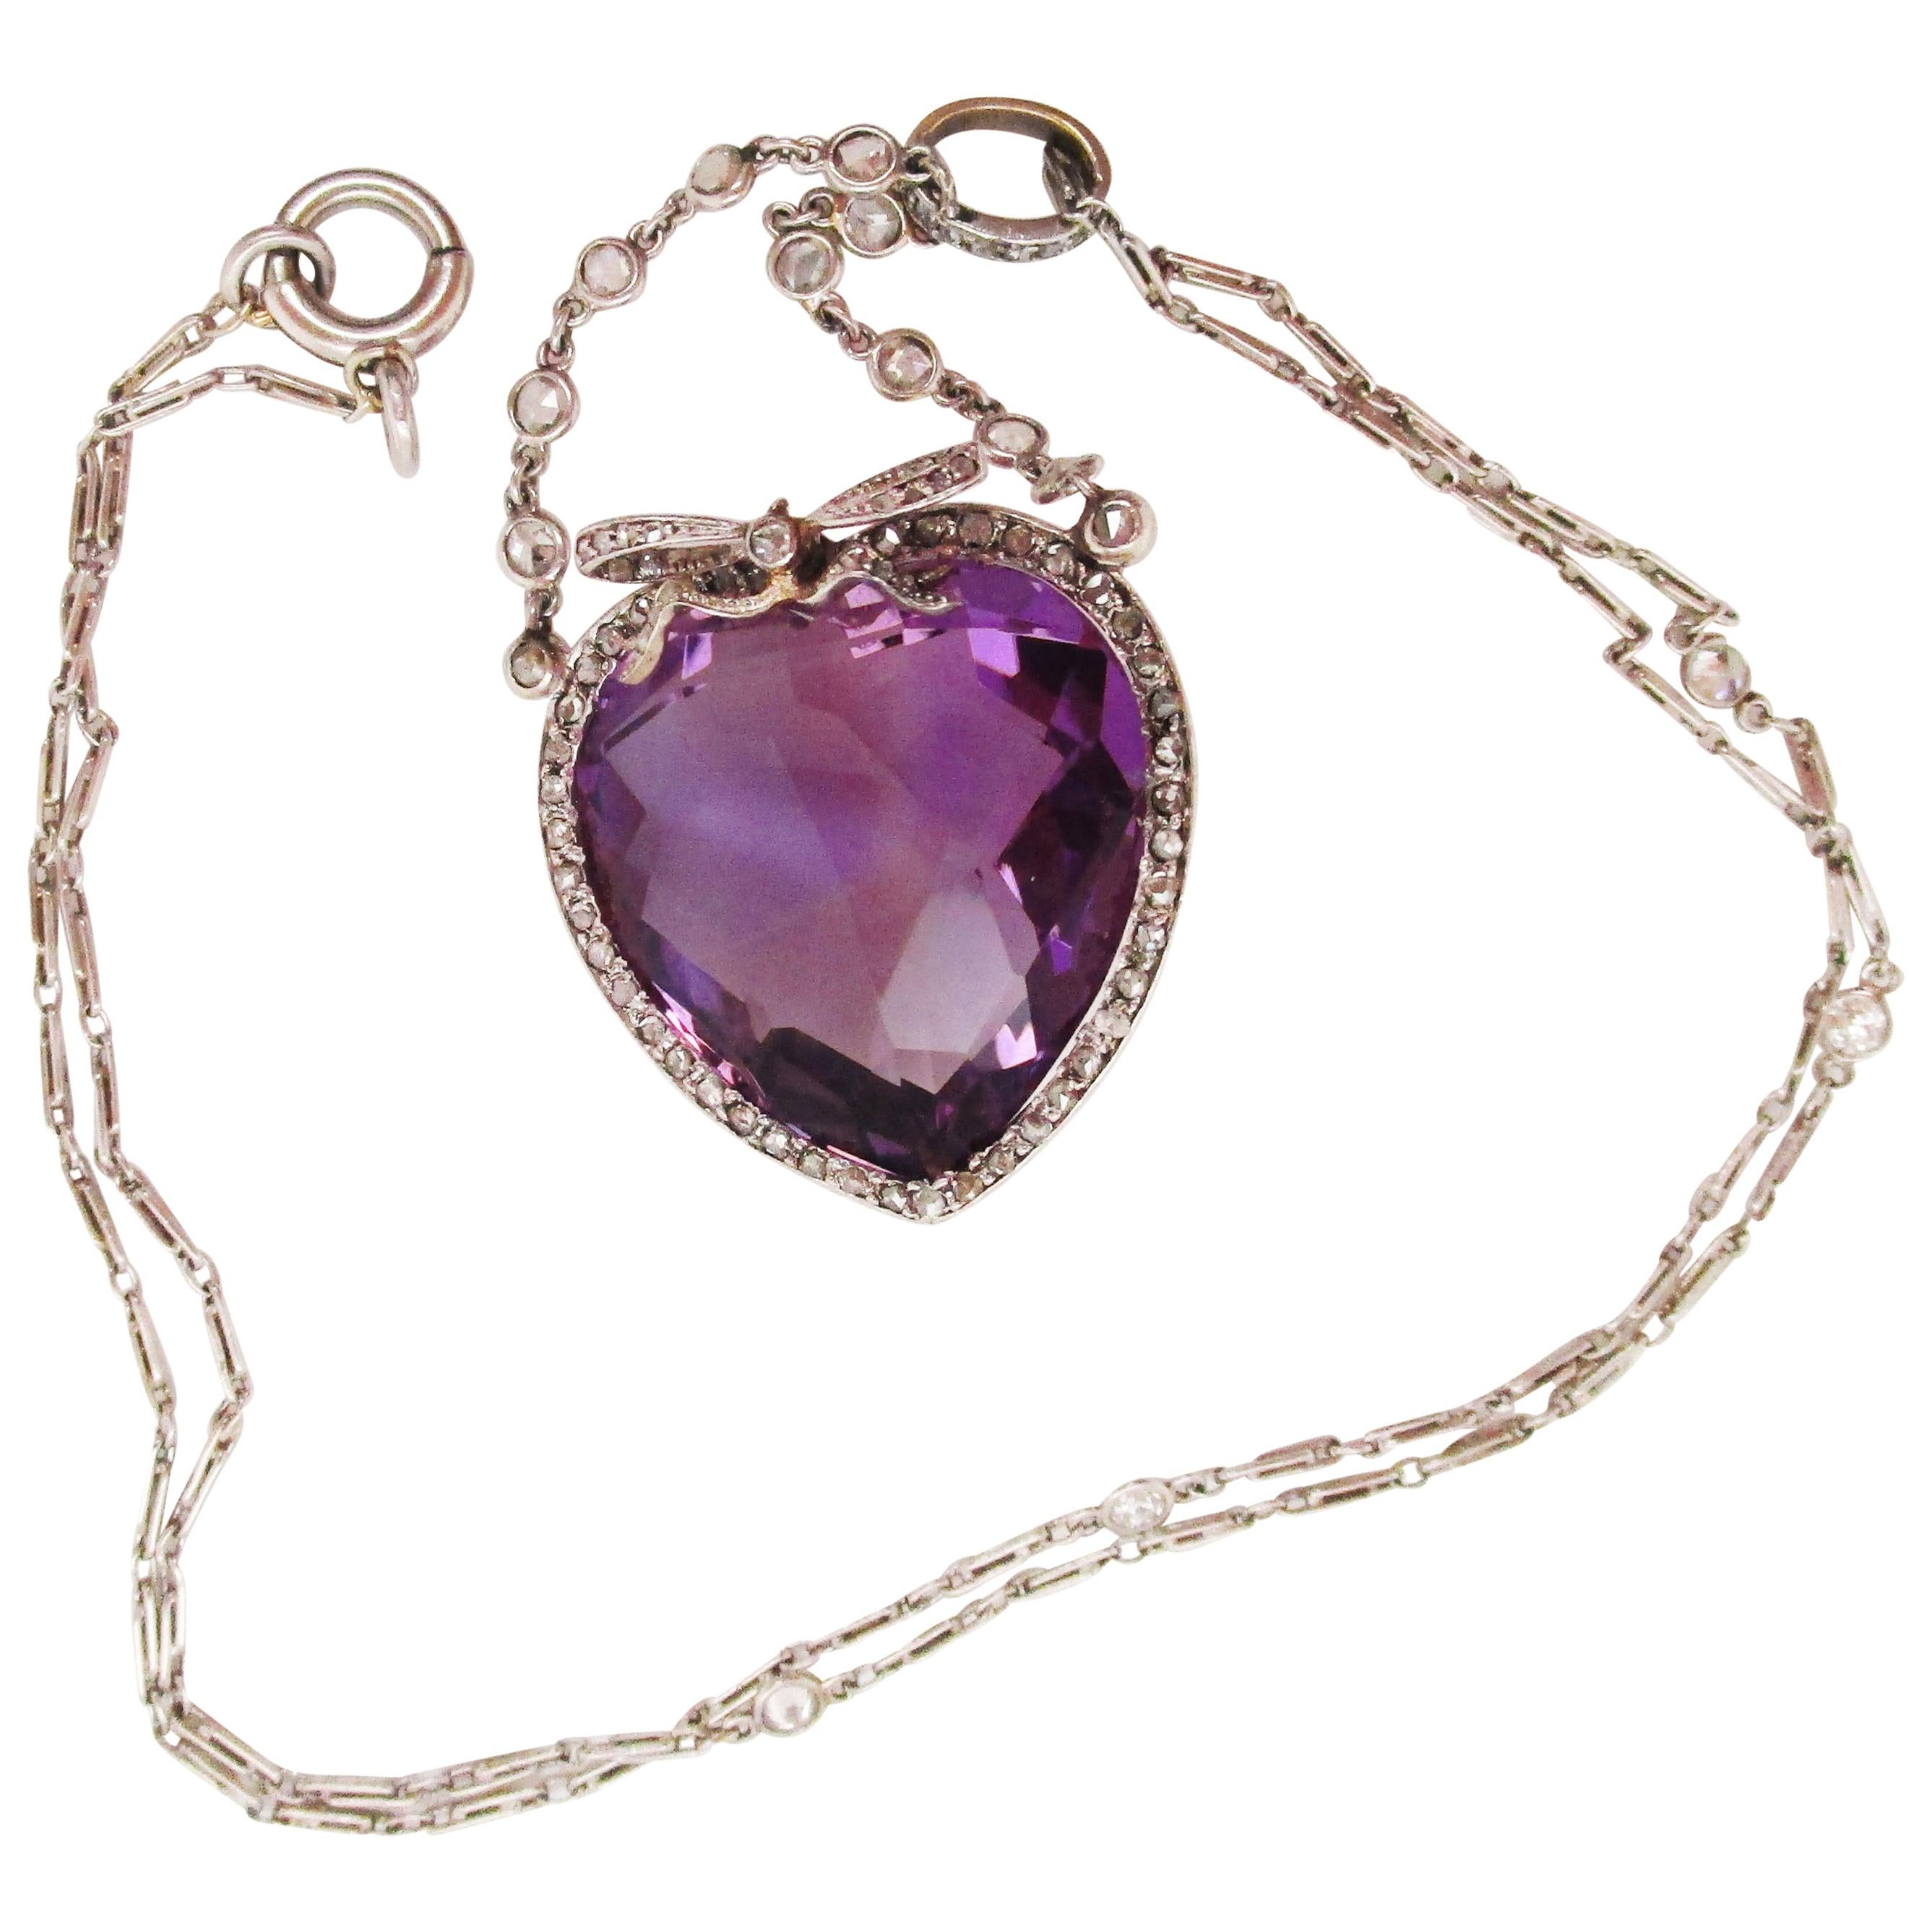 This gorgeous Edwardian necklace is from 1910 and is unlike anything you will see with its wonderful combination of platinum over yellow gold, rich purple amethyst, and brilliant white diamonds! The necklace features a platinum chain that boasts